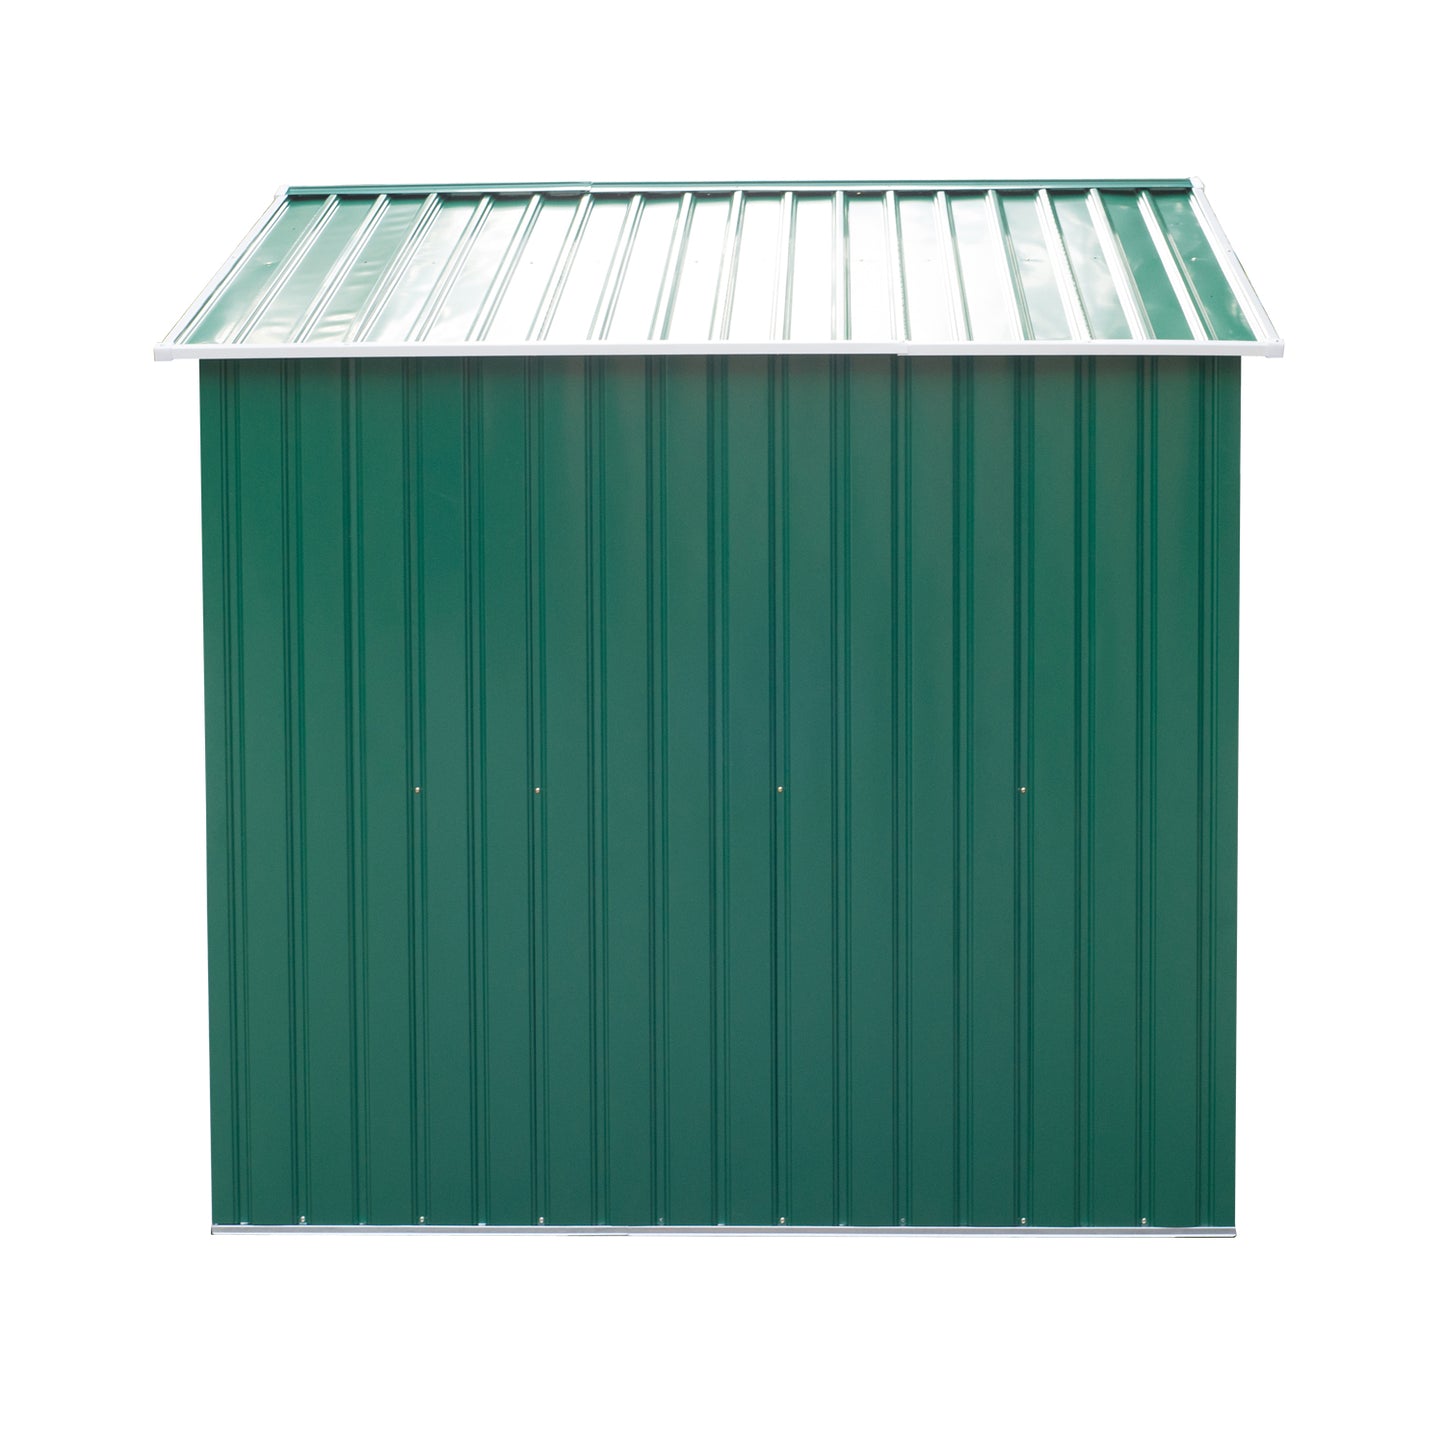 Outsunny 9 x 6ft Metal Garden Shed, Green